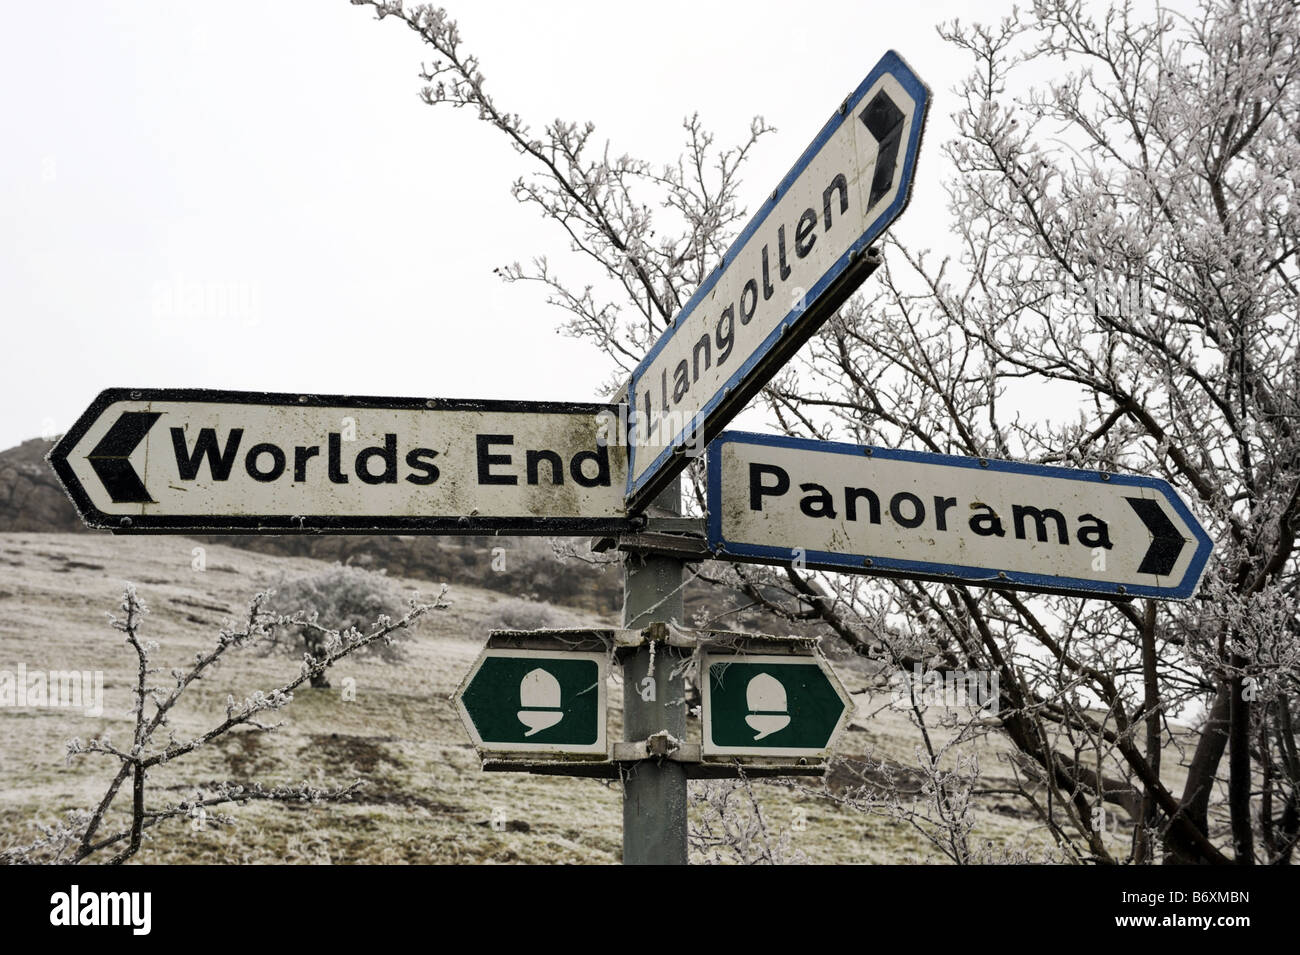 Signpost at Llangollen, Wales, to World's End and Panorama, marking Offa's Dyke Path Stock Photo